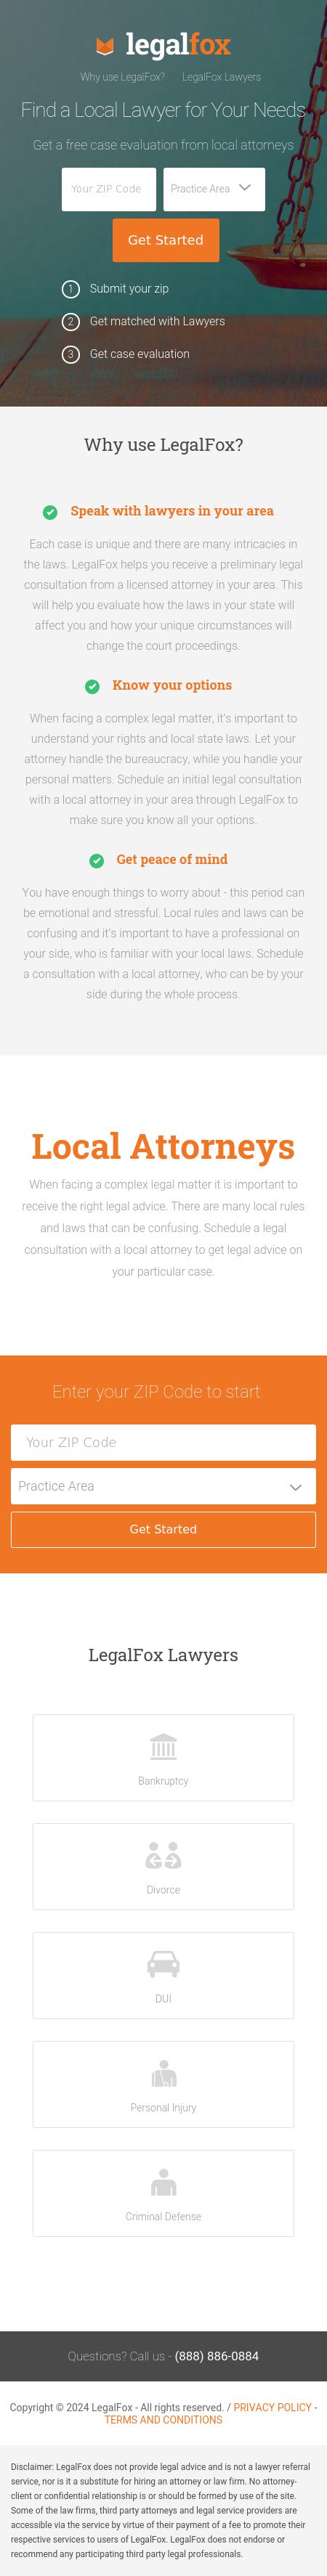 Find a Local Attorney - Clarksville TN Lawyers